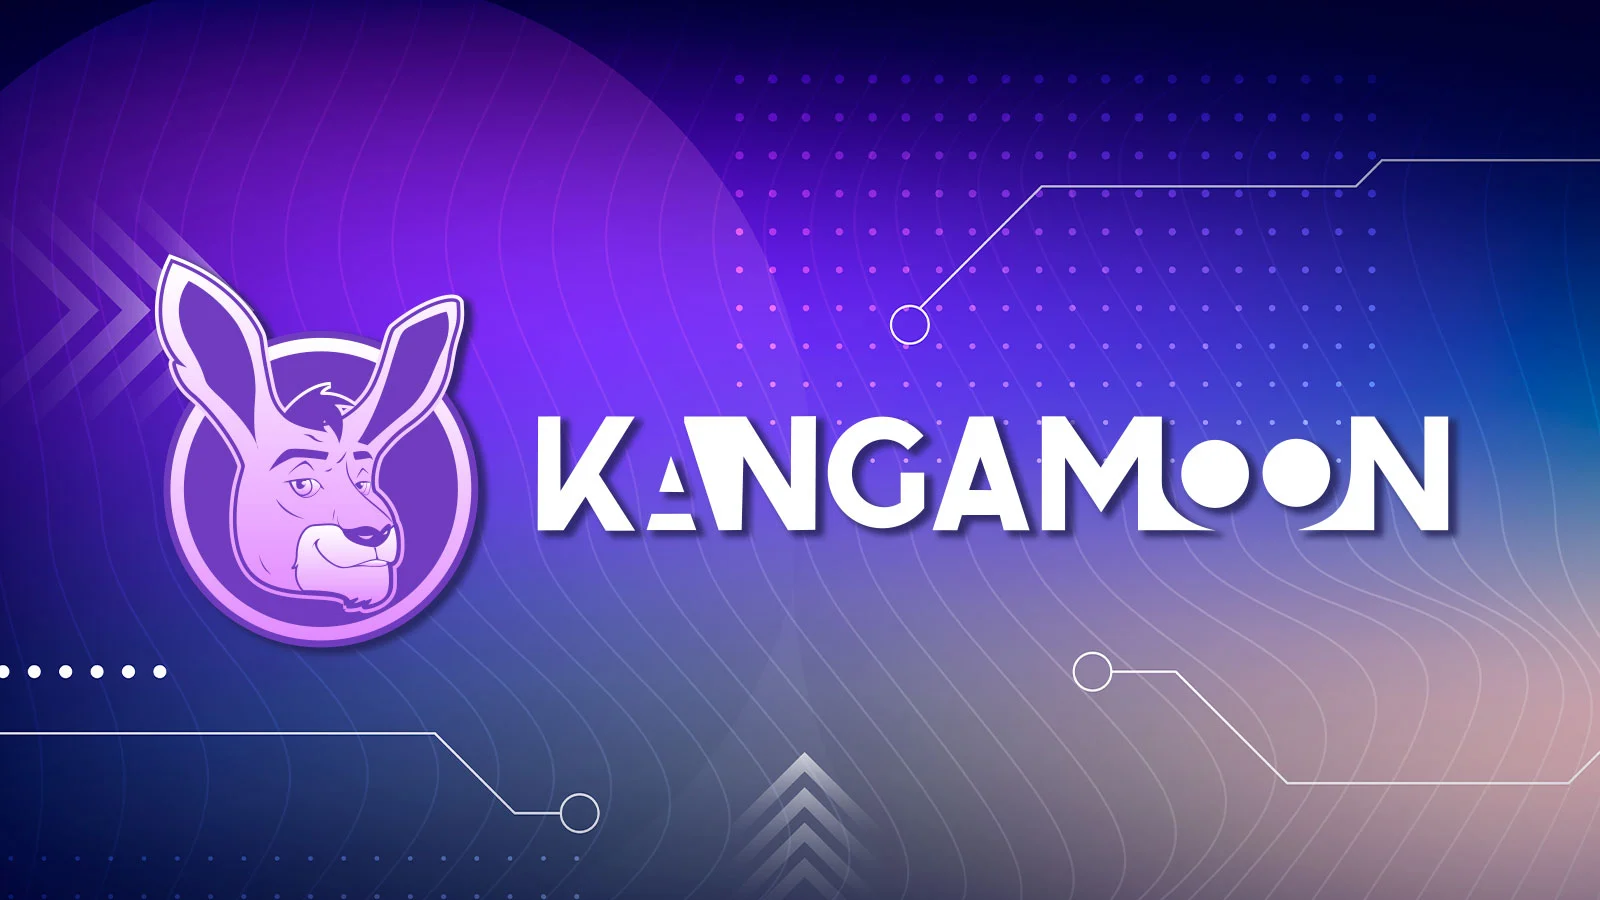 MoonBag Scalability and Presale Soars As BNB and KangaMoon Weather Market Storms: Who Will Reign Supreme? = The Bit Journal